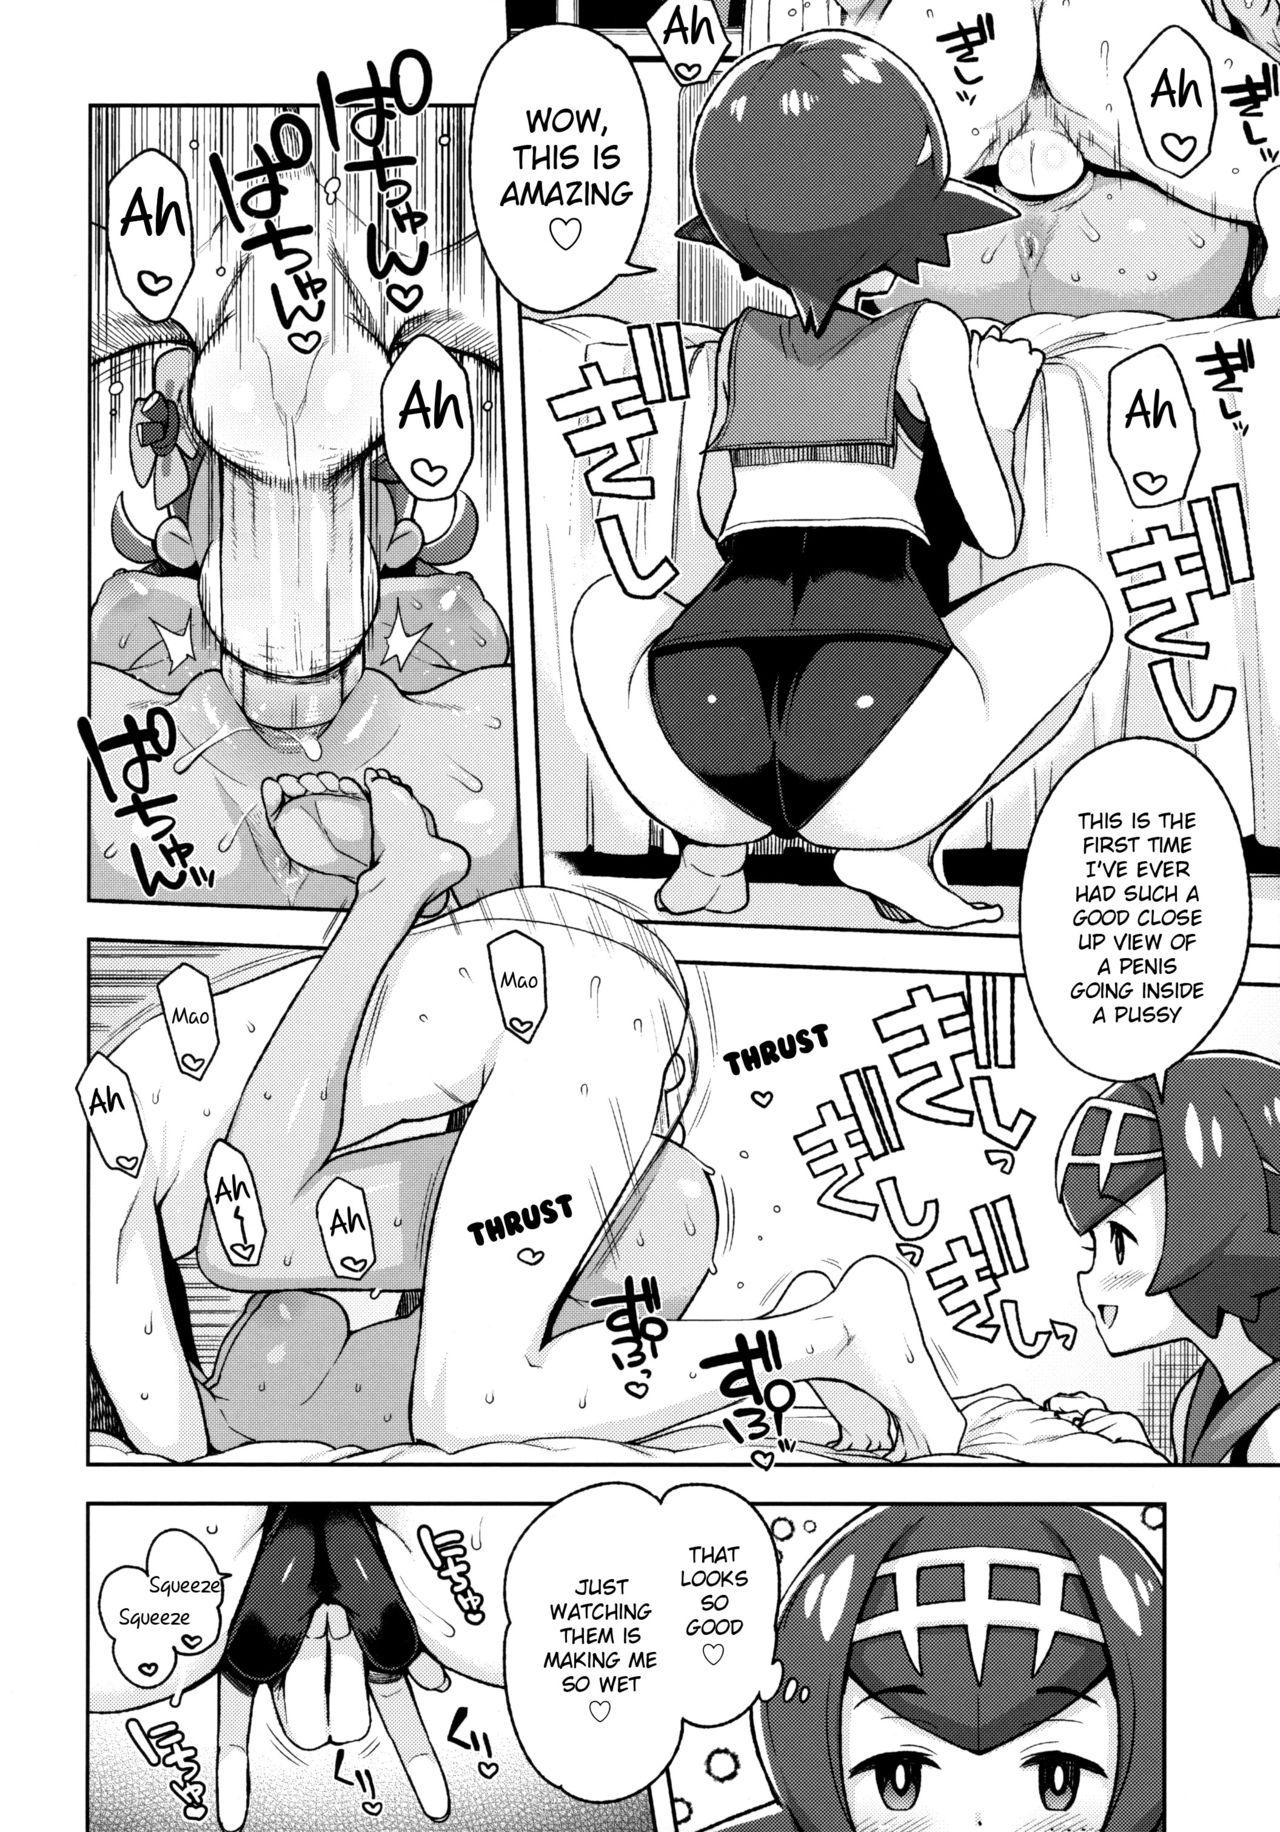 Group MAO FRIENDS2 - Pokemon | pocket monsters Fodendo - Page 9